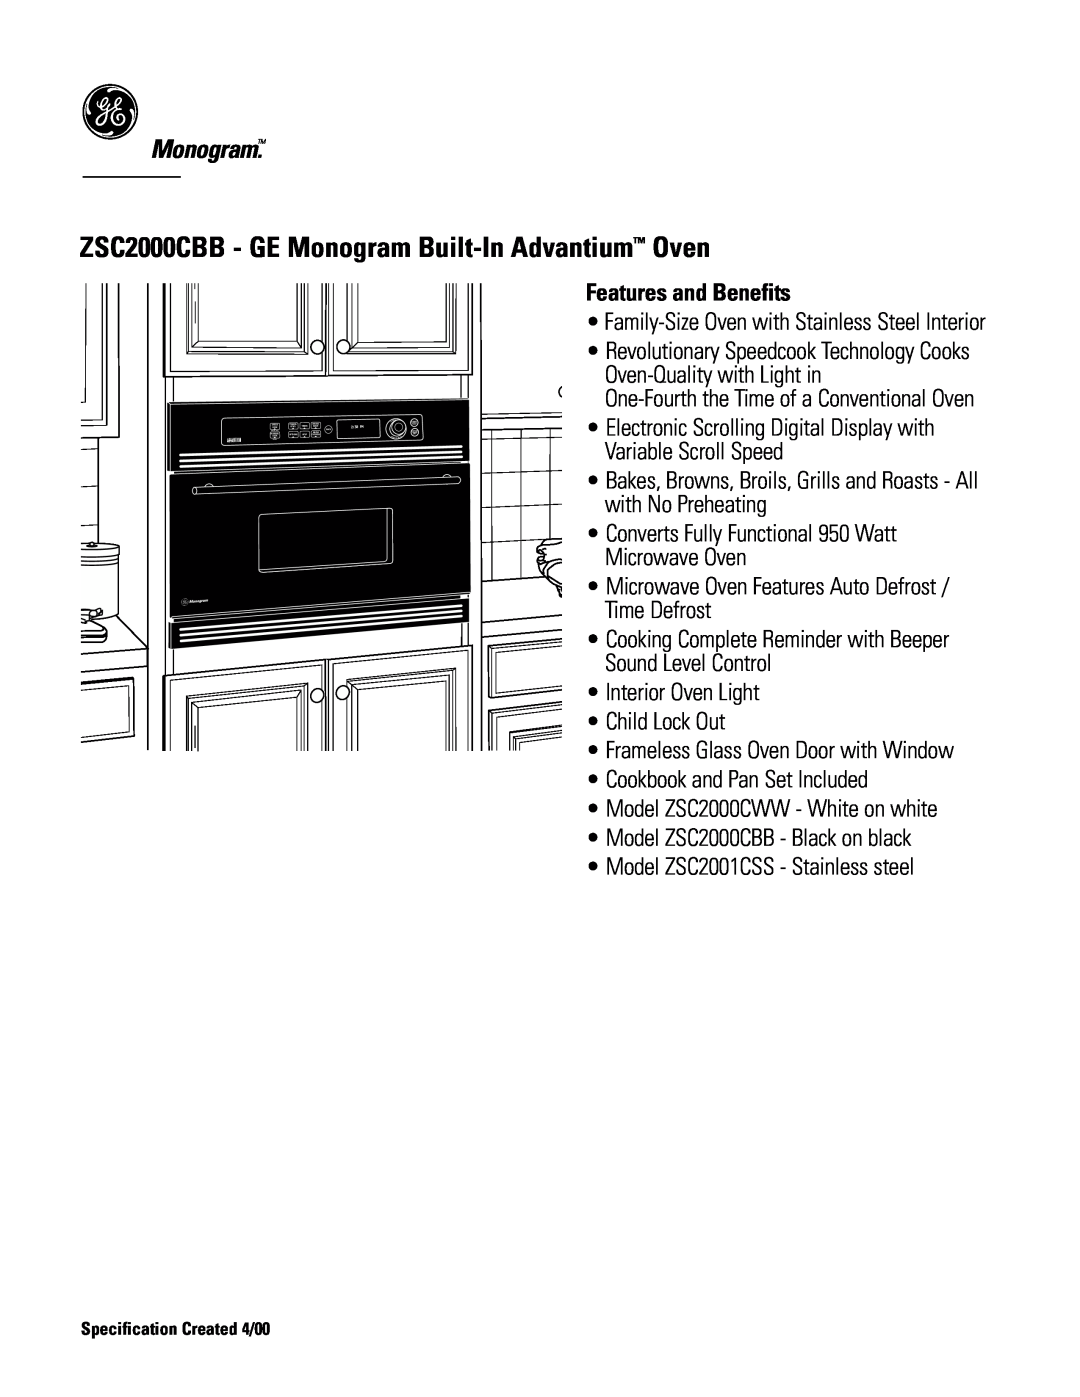 GE dimensions ZSC2000CBB - GE Monogram Built-InAdvantium Oven, Features and Benefits 